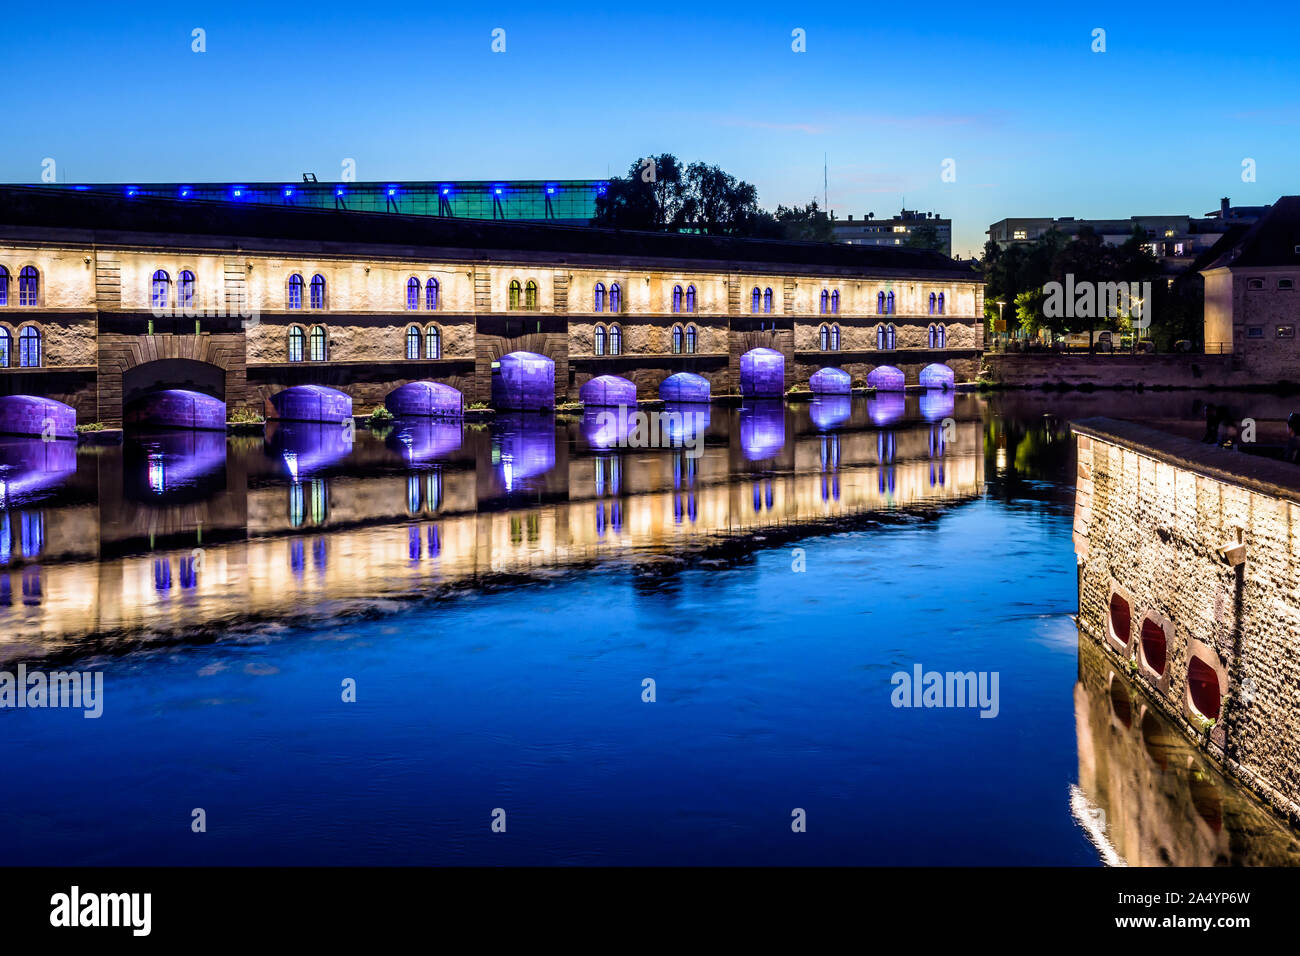 The Vauban Dam illuminated at nightfall in Strasbourg, France, a defensive work on the river Ill in the Petite France historic quarter. Stock Photo